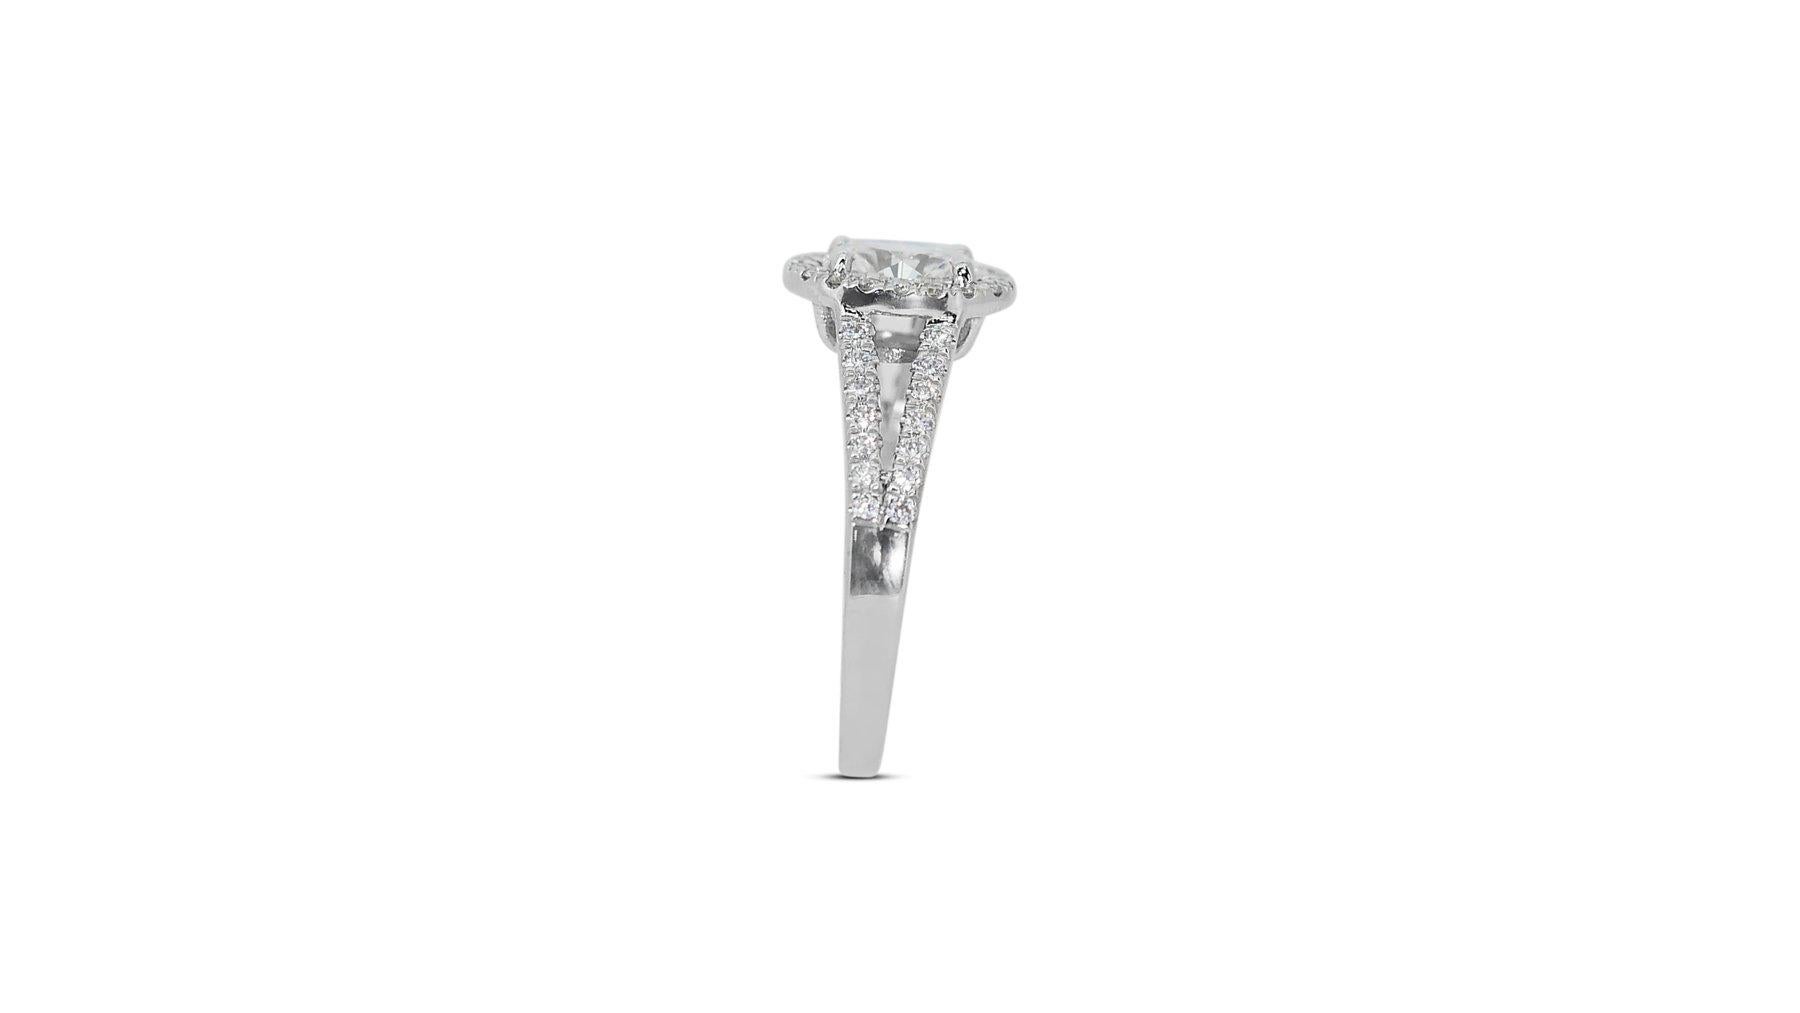 Glamorous 1.30ct Oval Diamond Halo Ring in 18K White Gold - GIA Certified For Sale 1